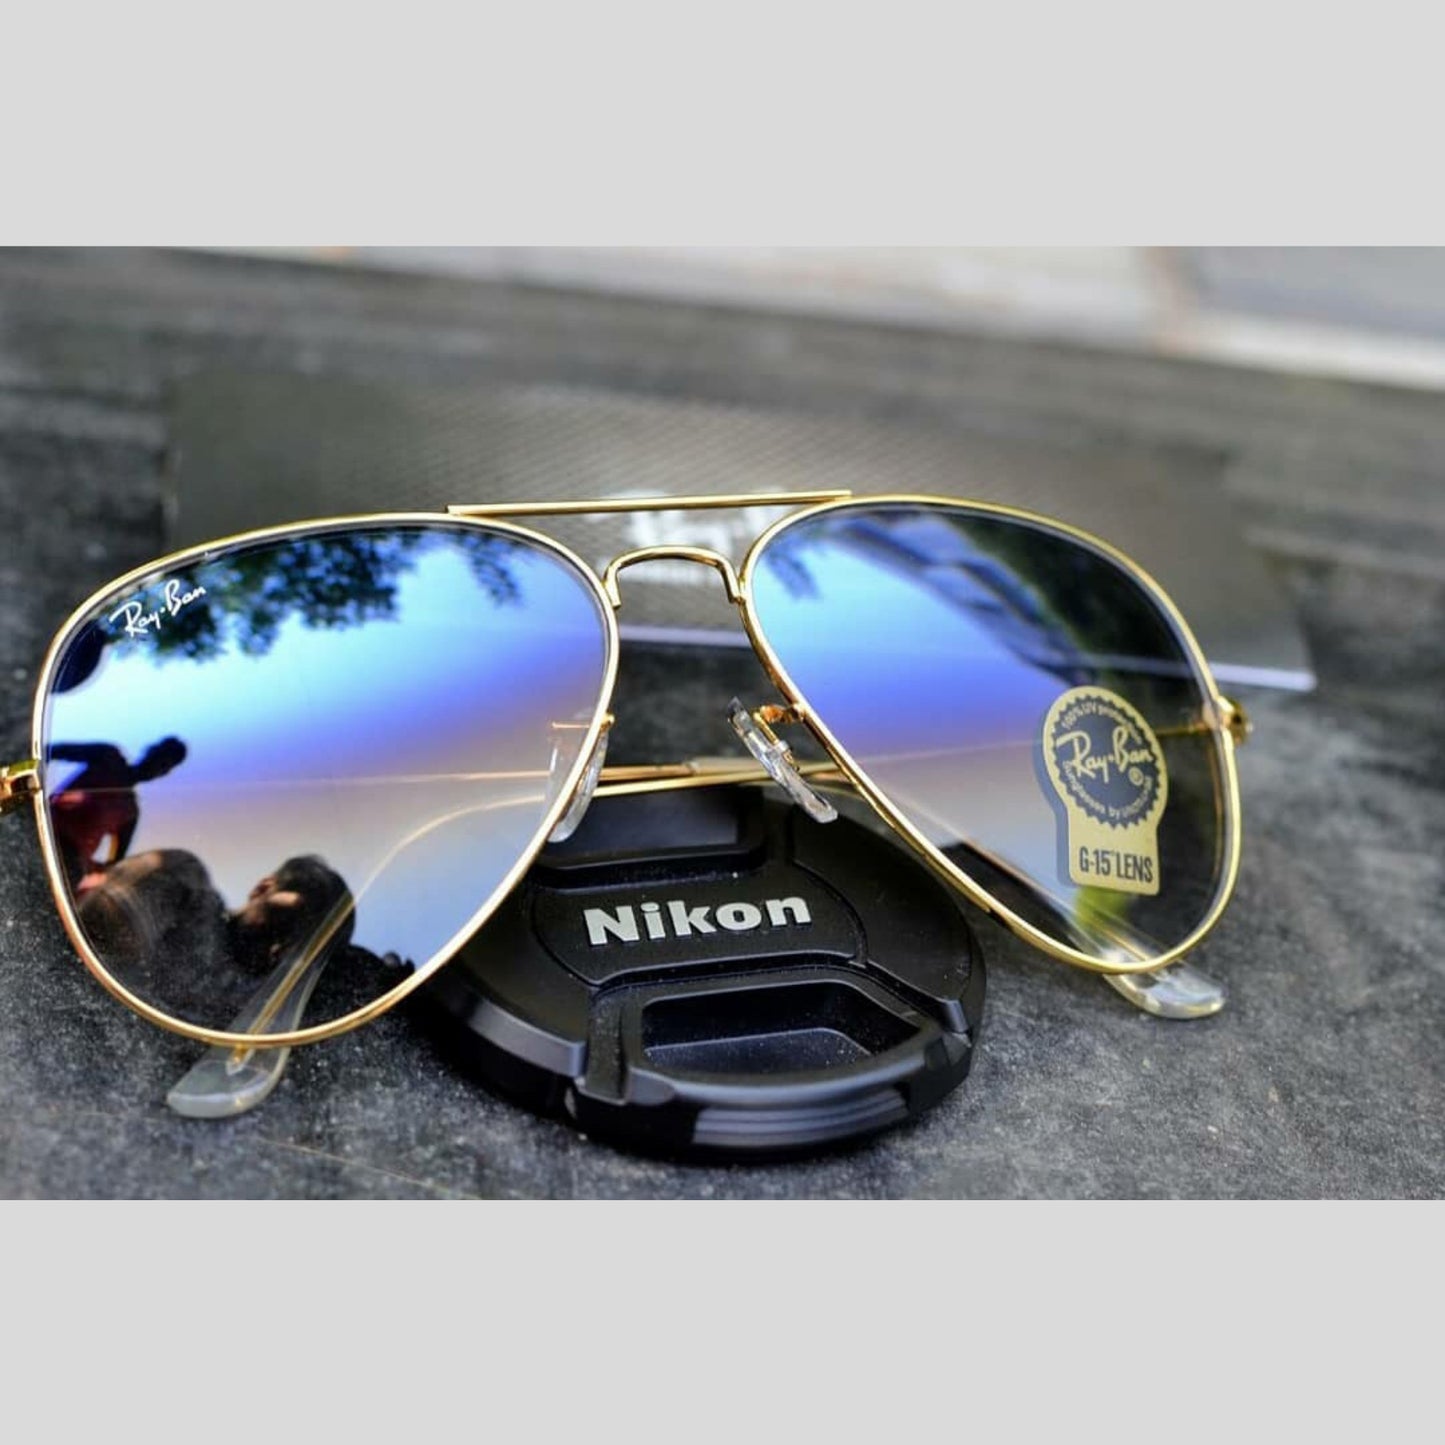 Blue Shaded & Gold 3026 Oval Aviator Causal Latest Sunglass For Unisex.